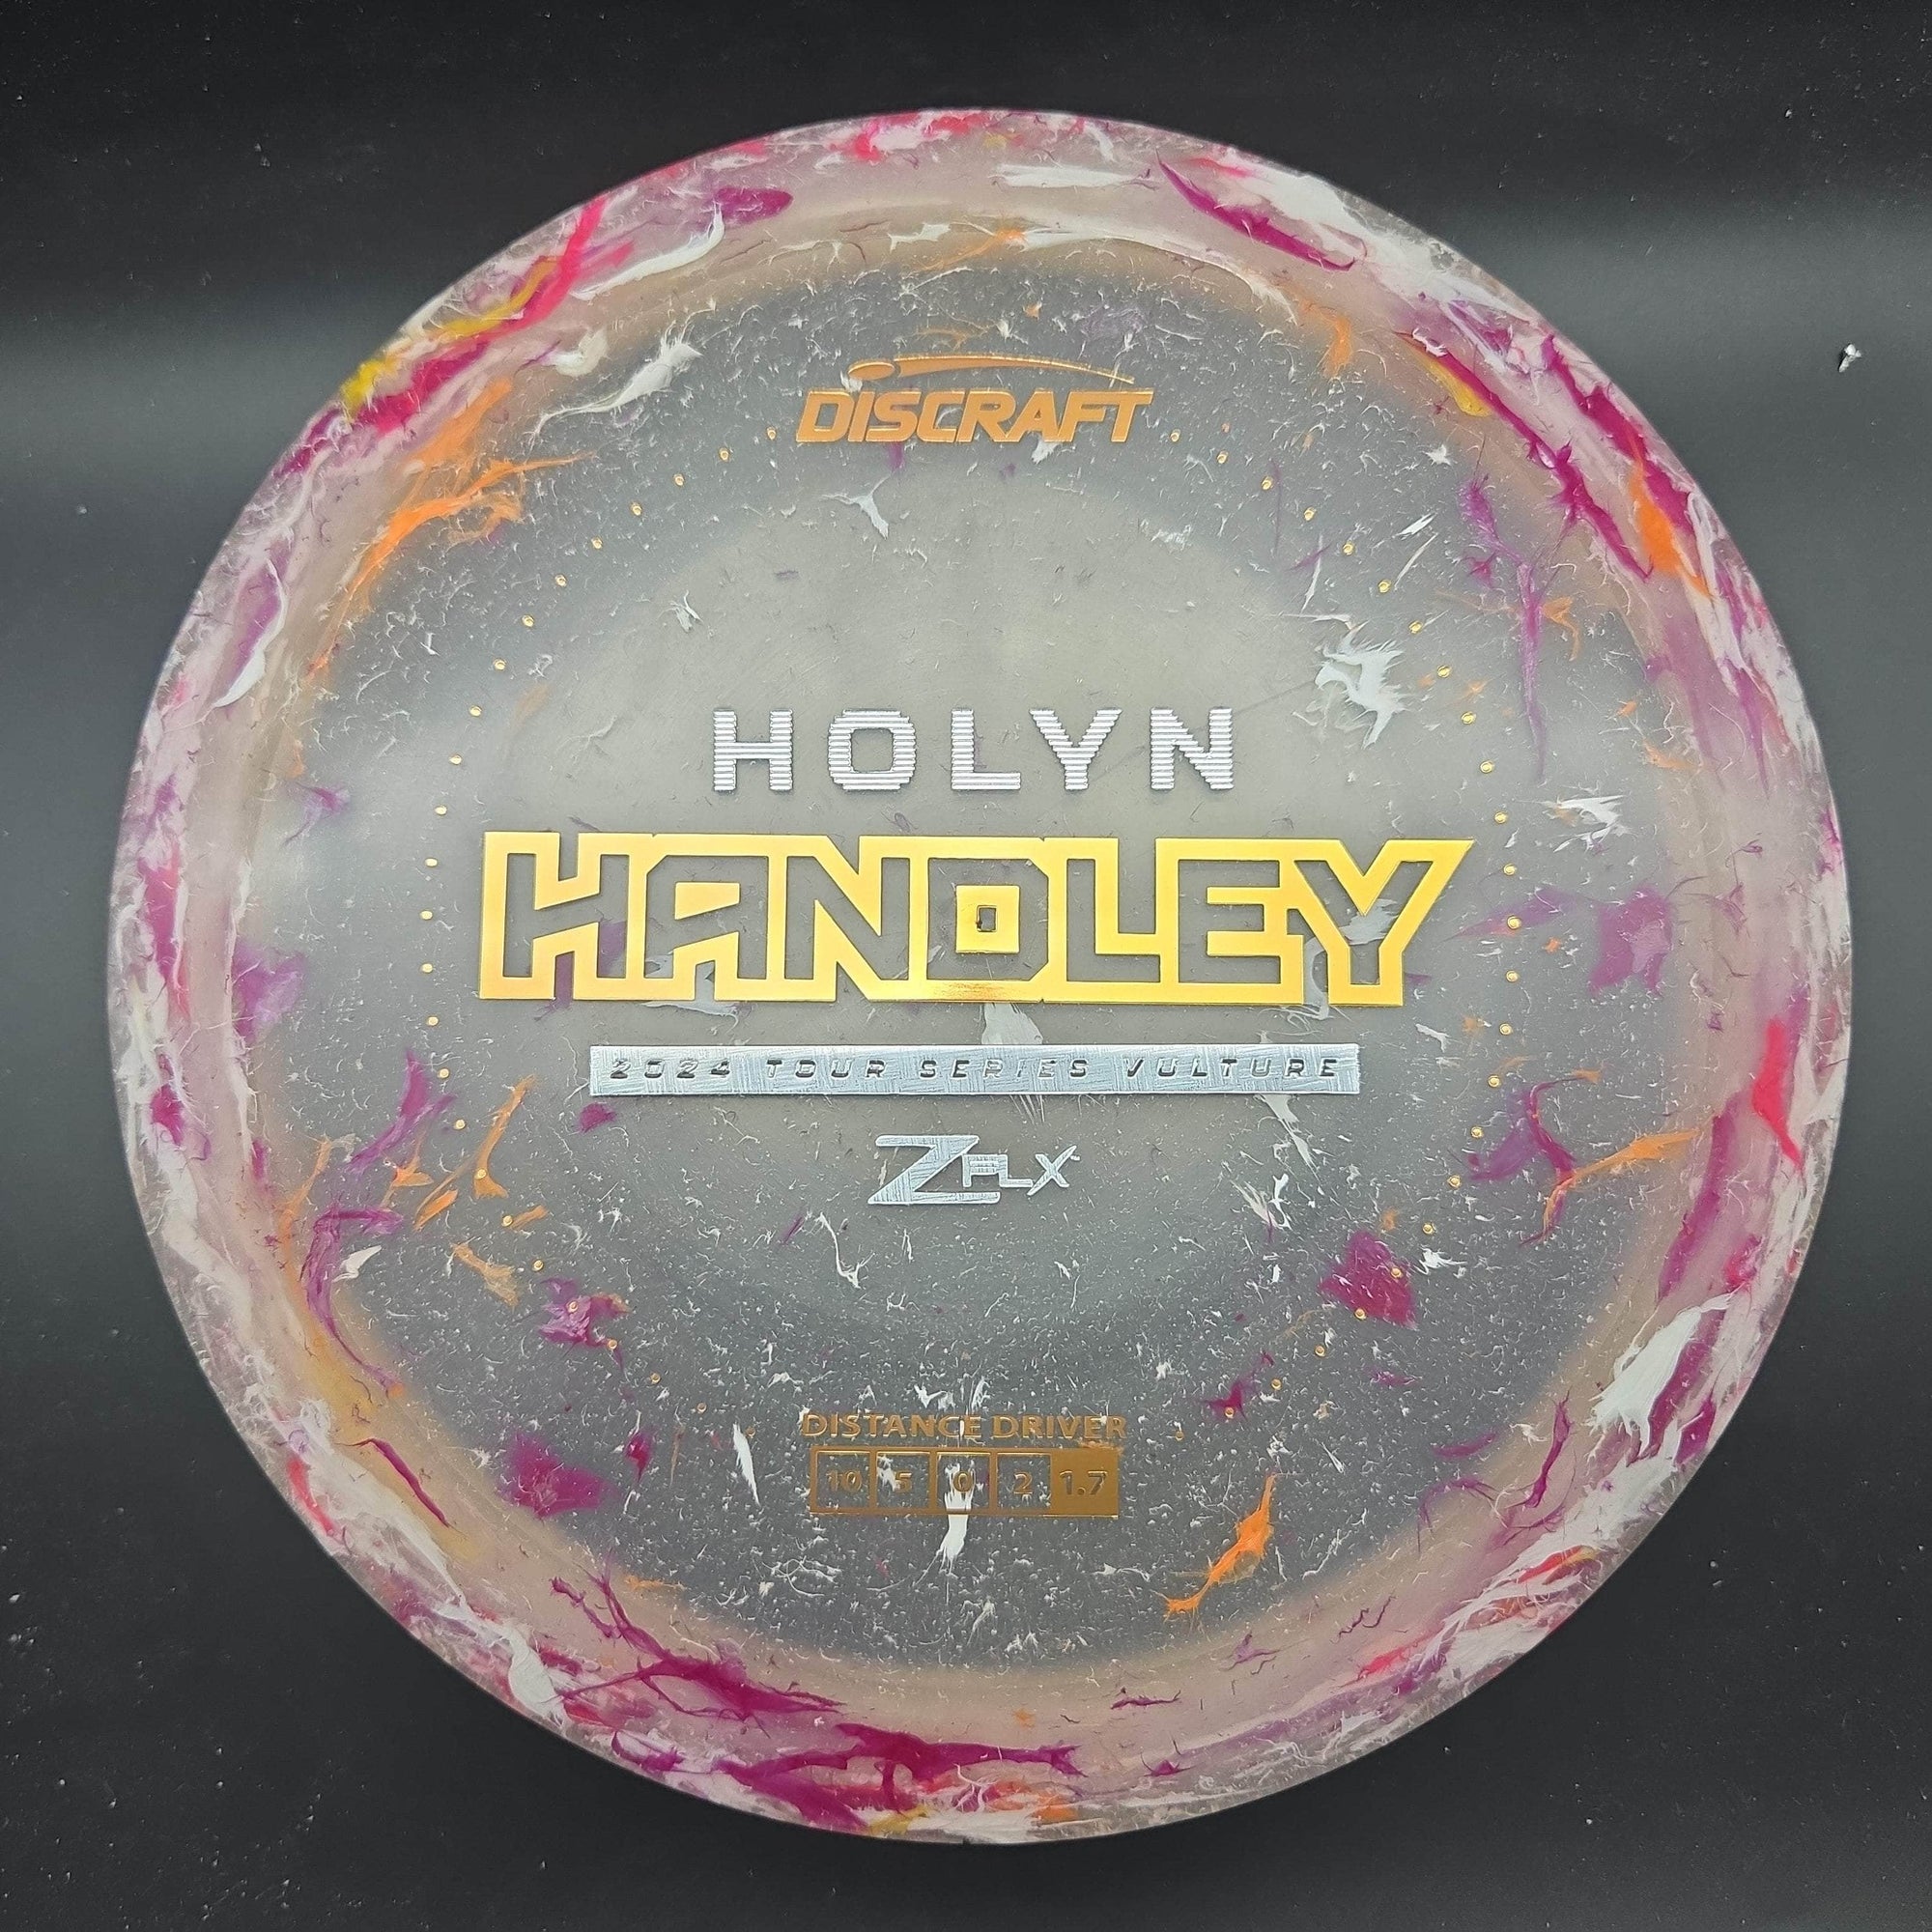 Discraft White Silver/Copper Stamp 171g Vulture, Zflx, Holyn Handley 2024 Tour Series